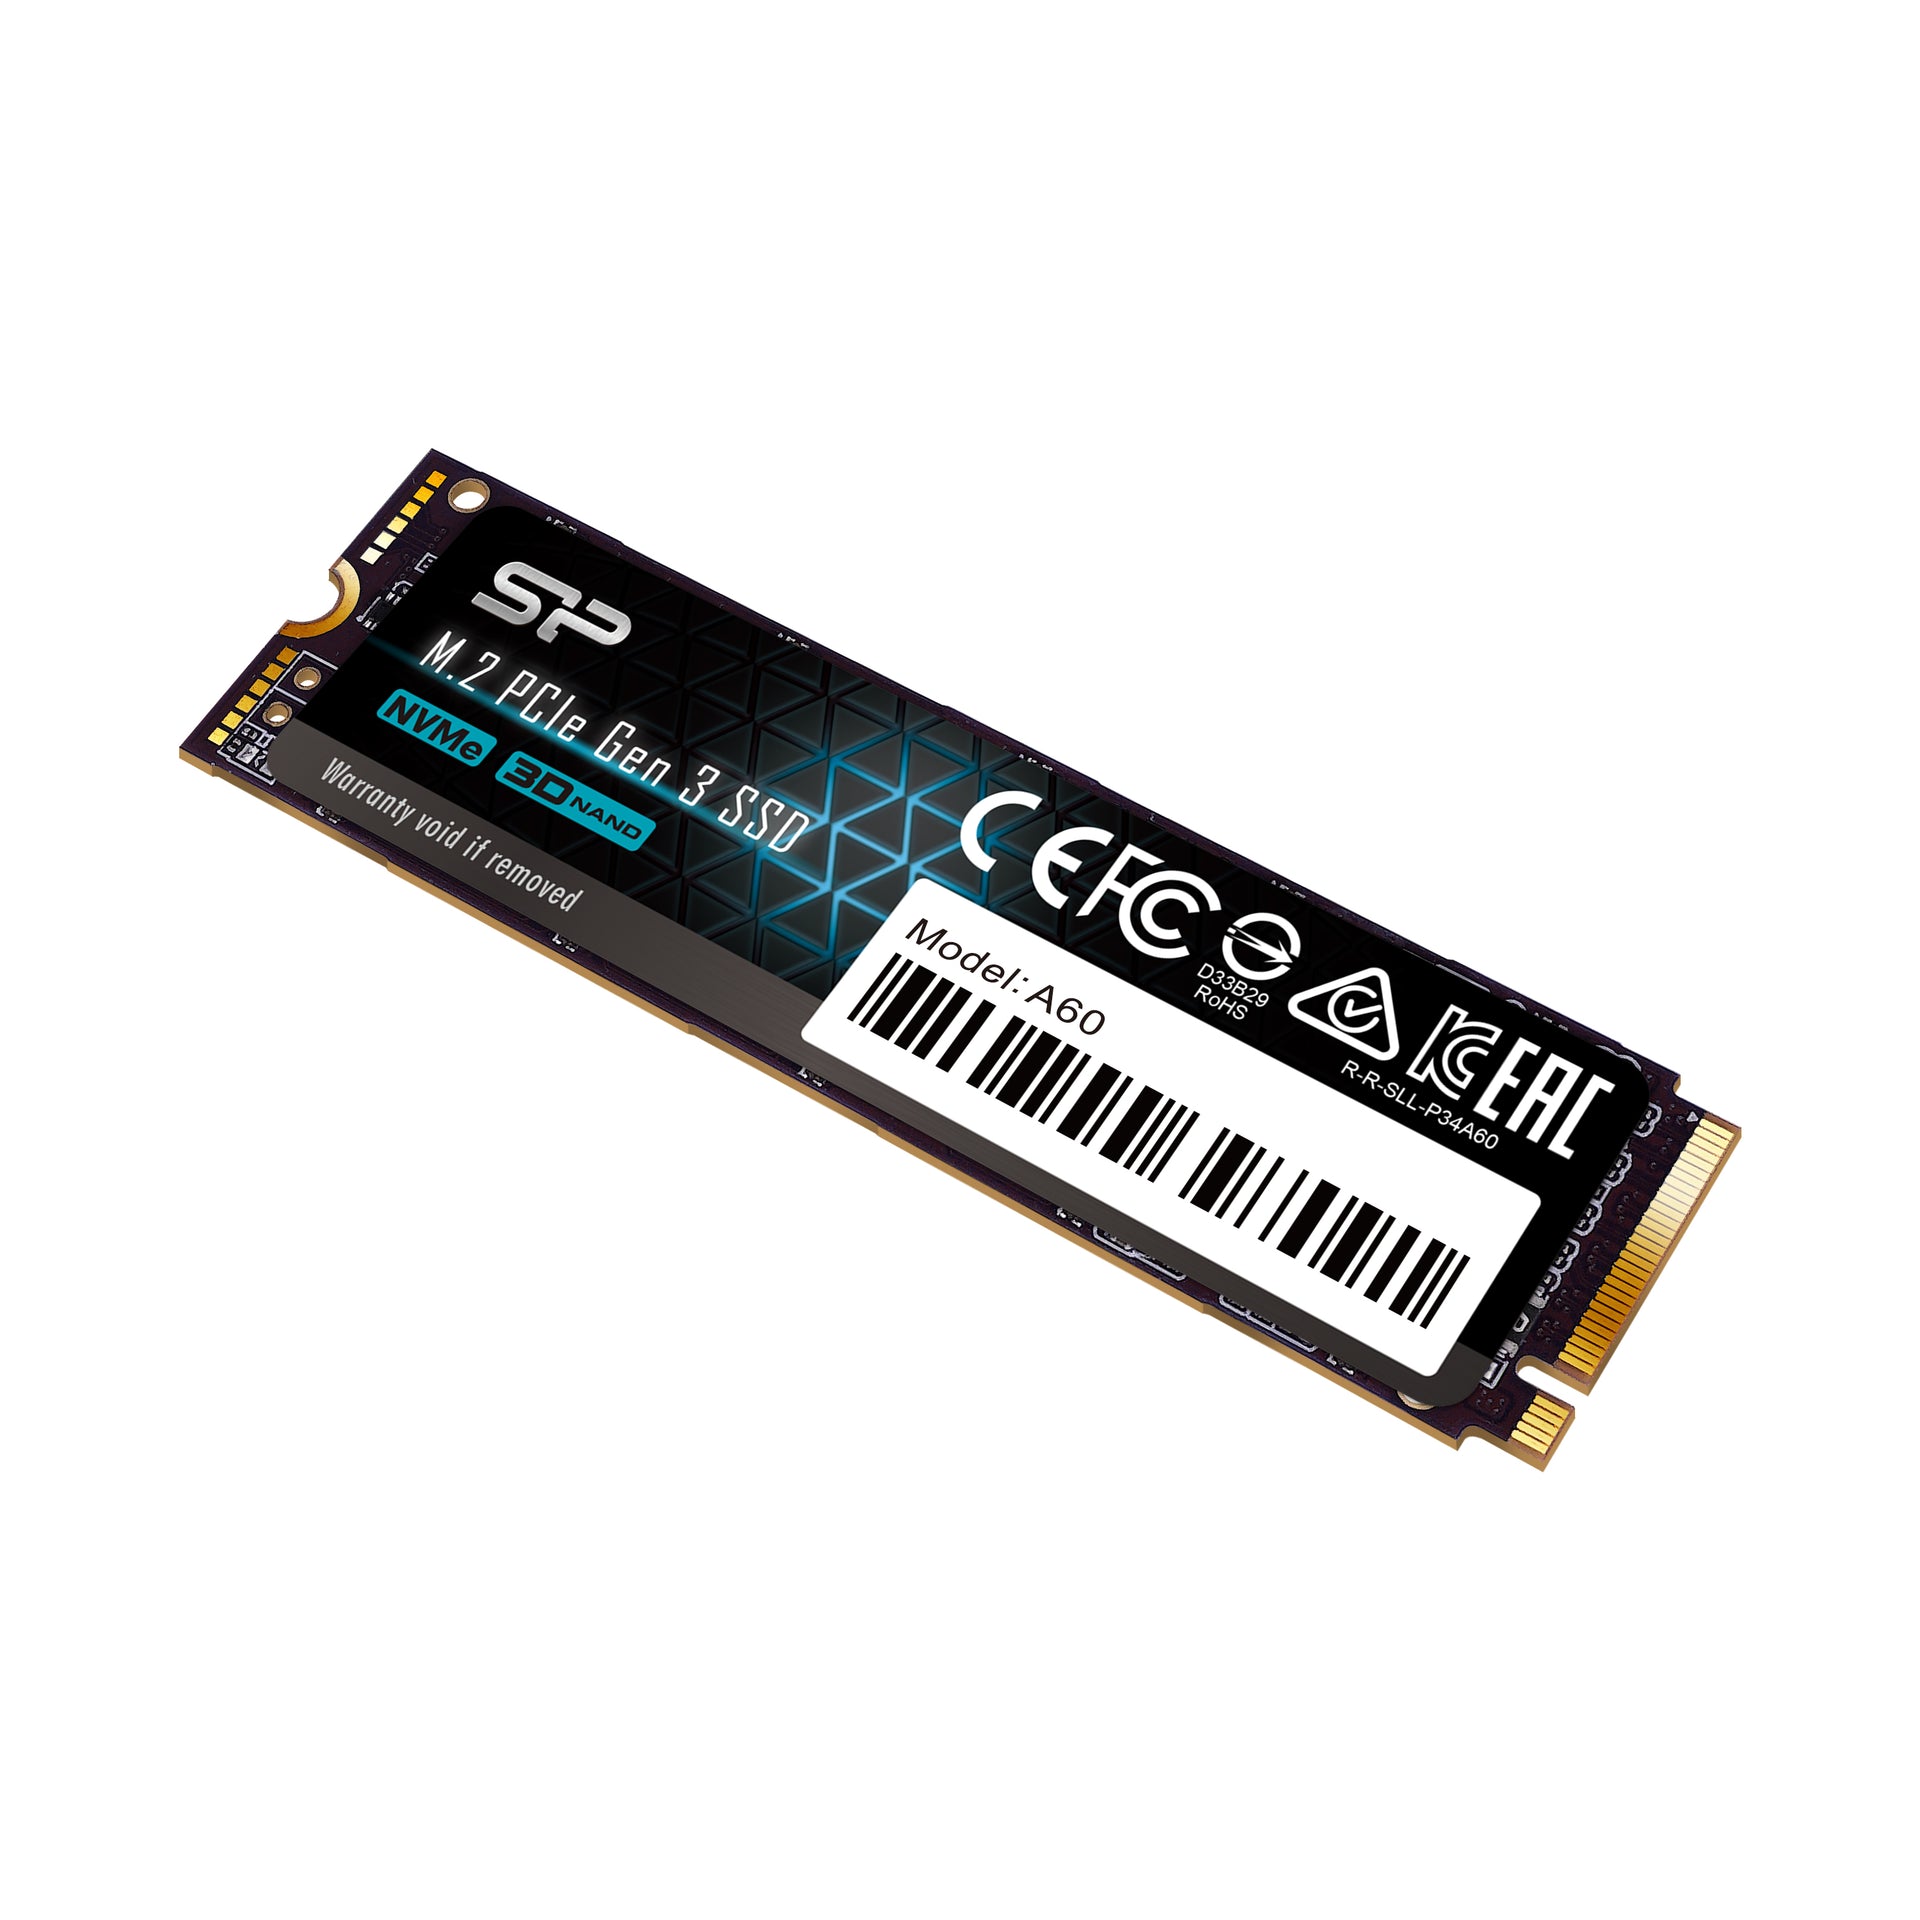 Silicon Power P34A60 128GB-2TB NVMe PCIe Gen3x4 M.2 2280 Internal Solid State Drive